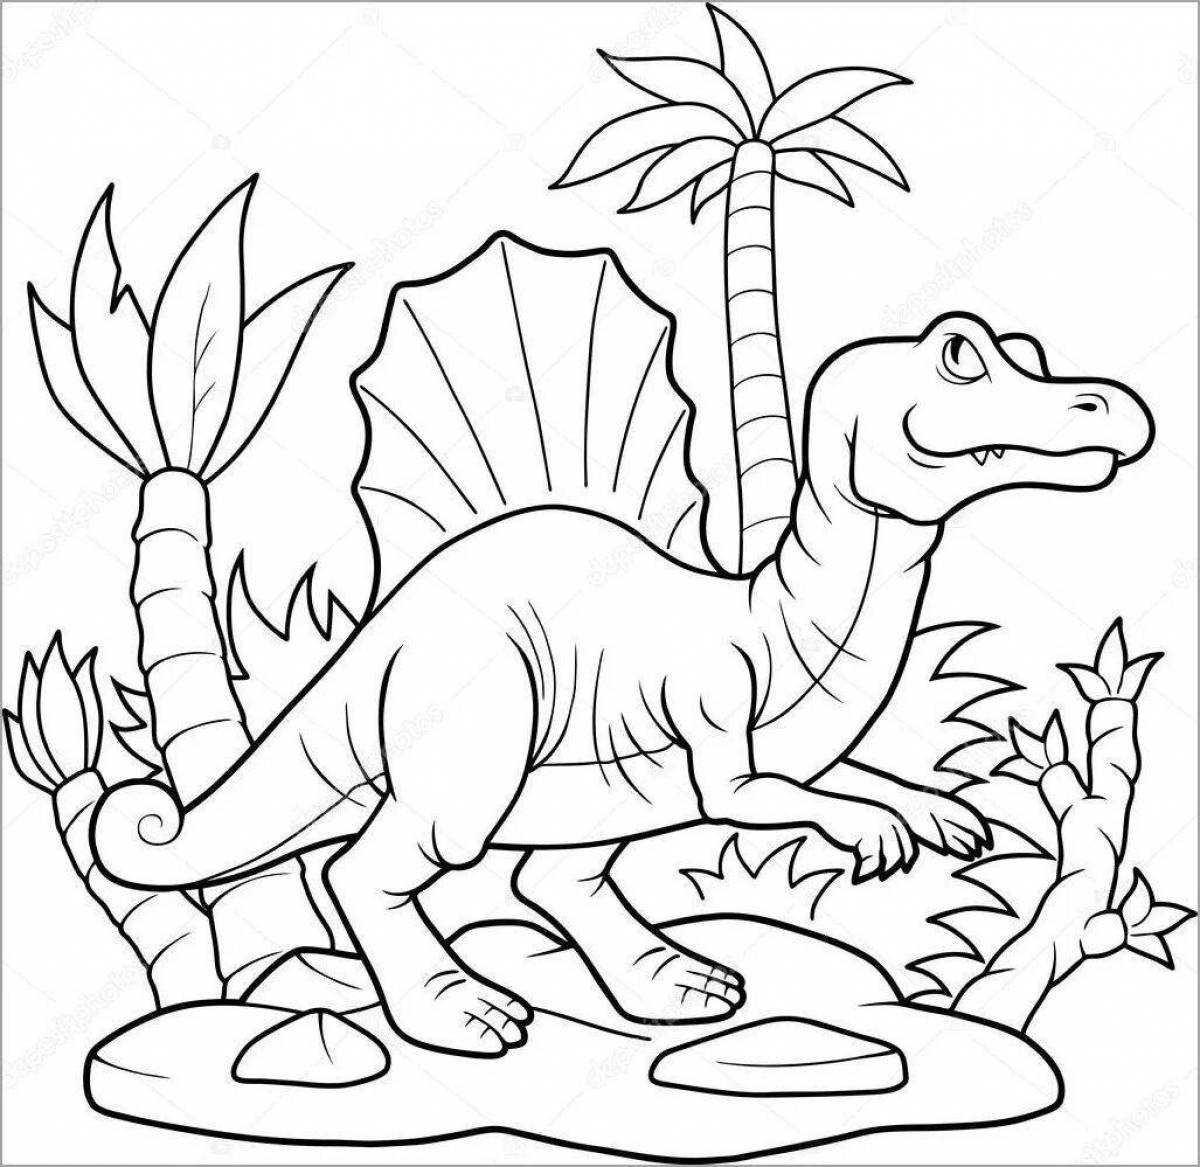 Great spinosaurus coloring book for kids